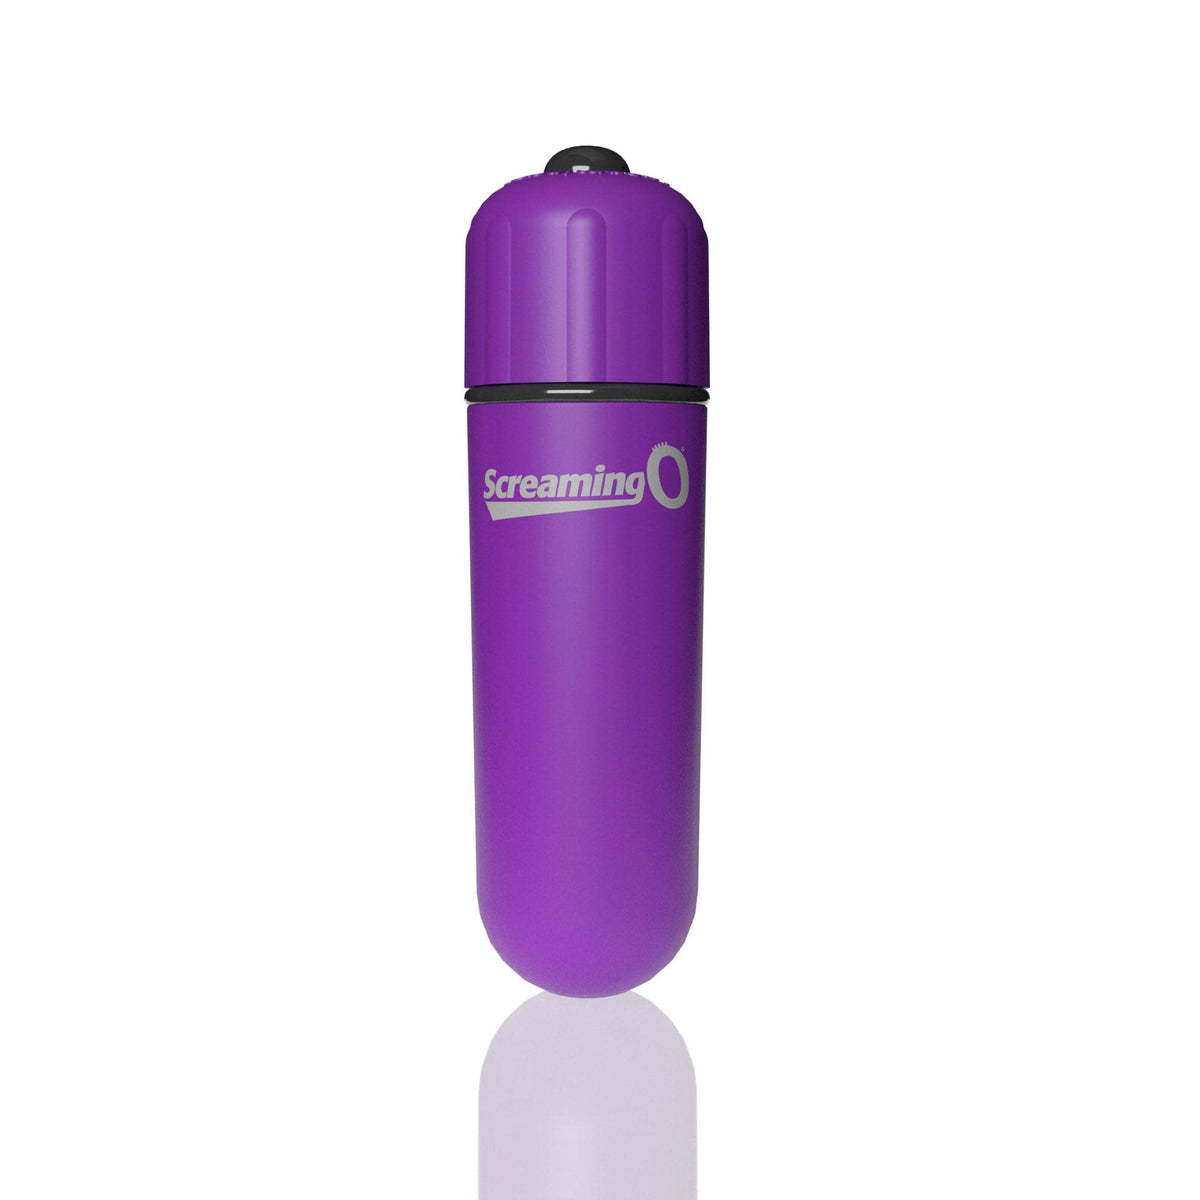 screaming o 4t bullet super powered one touch vibrating bullet grape